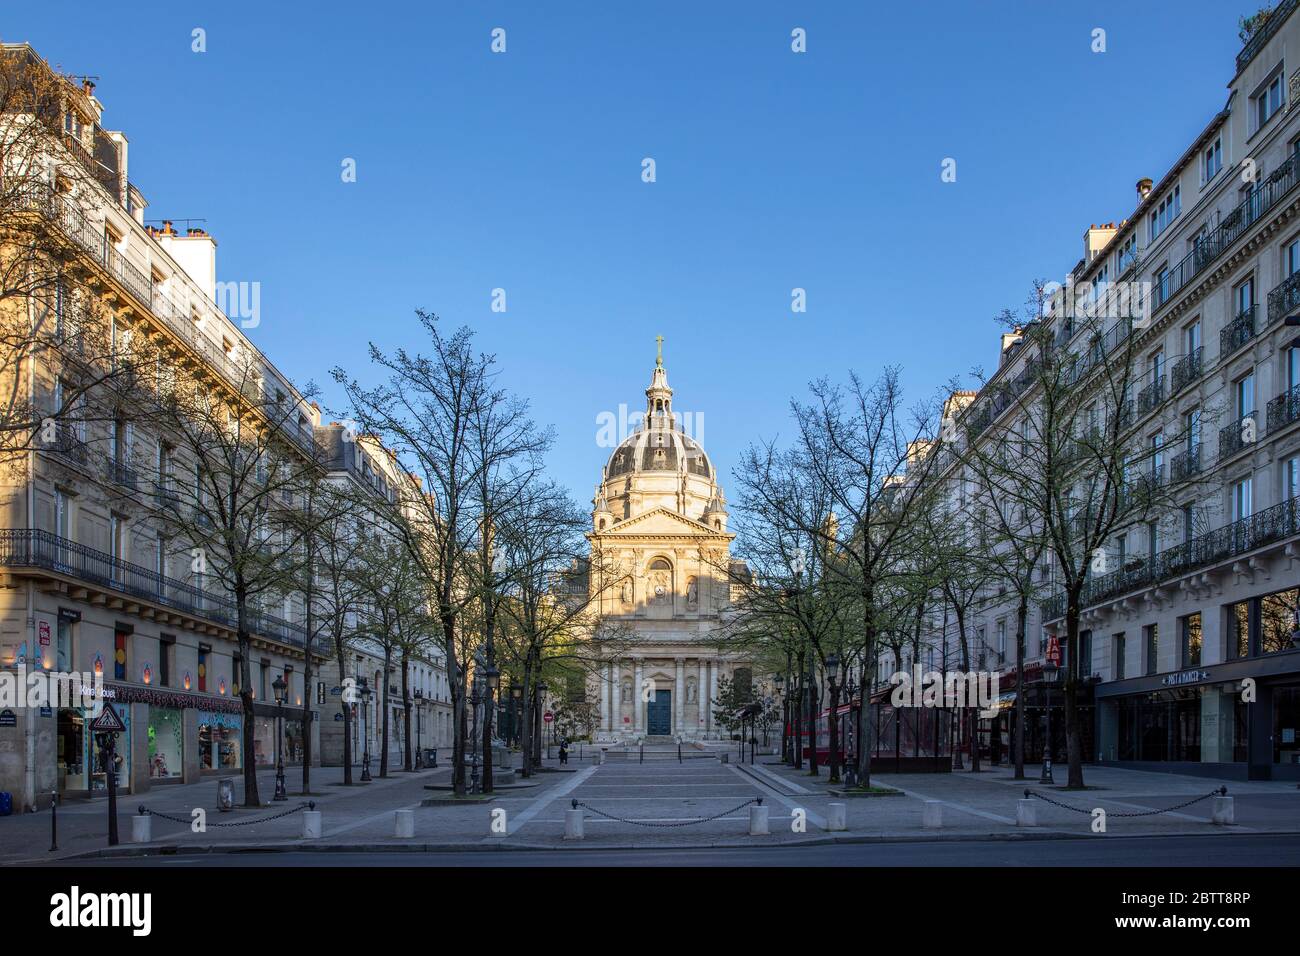 Paris, France - March 30, 2020: 14th day of containment because of Covid-19 in front of Sorbonne university in Paris. Nobody in the street Stock Photo